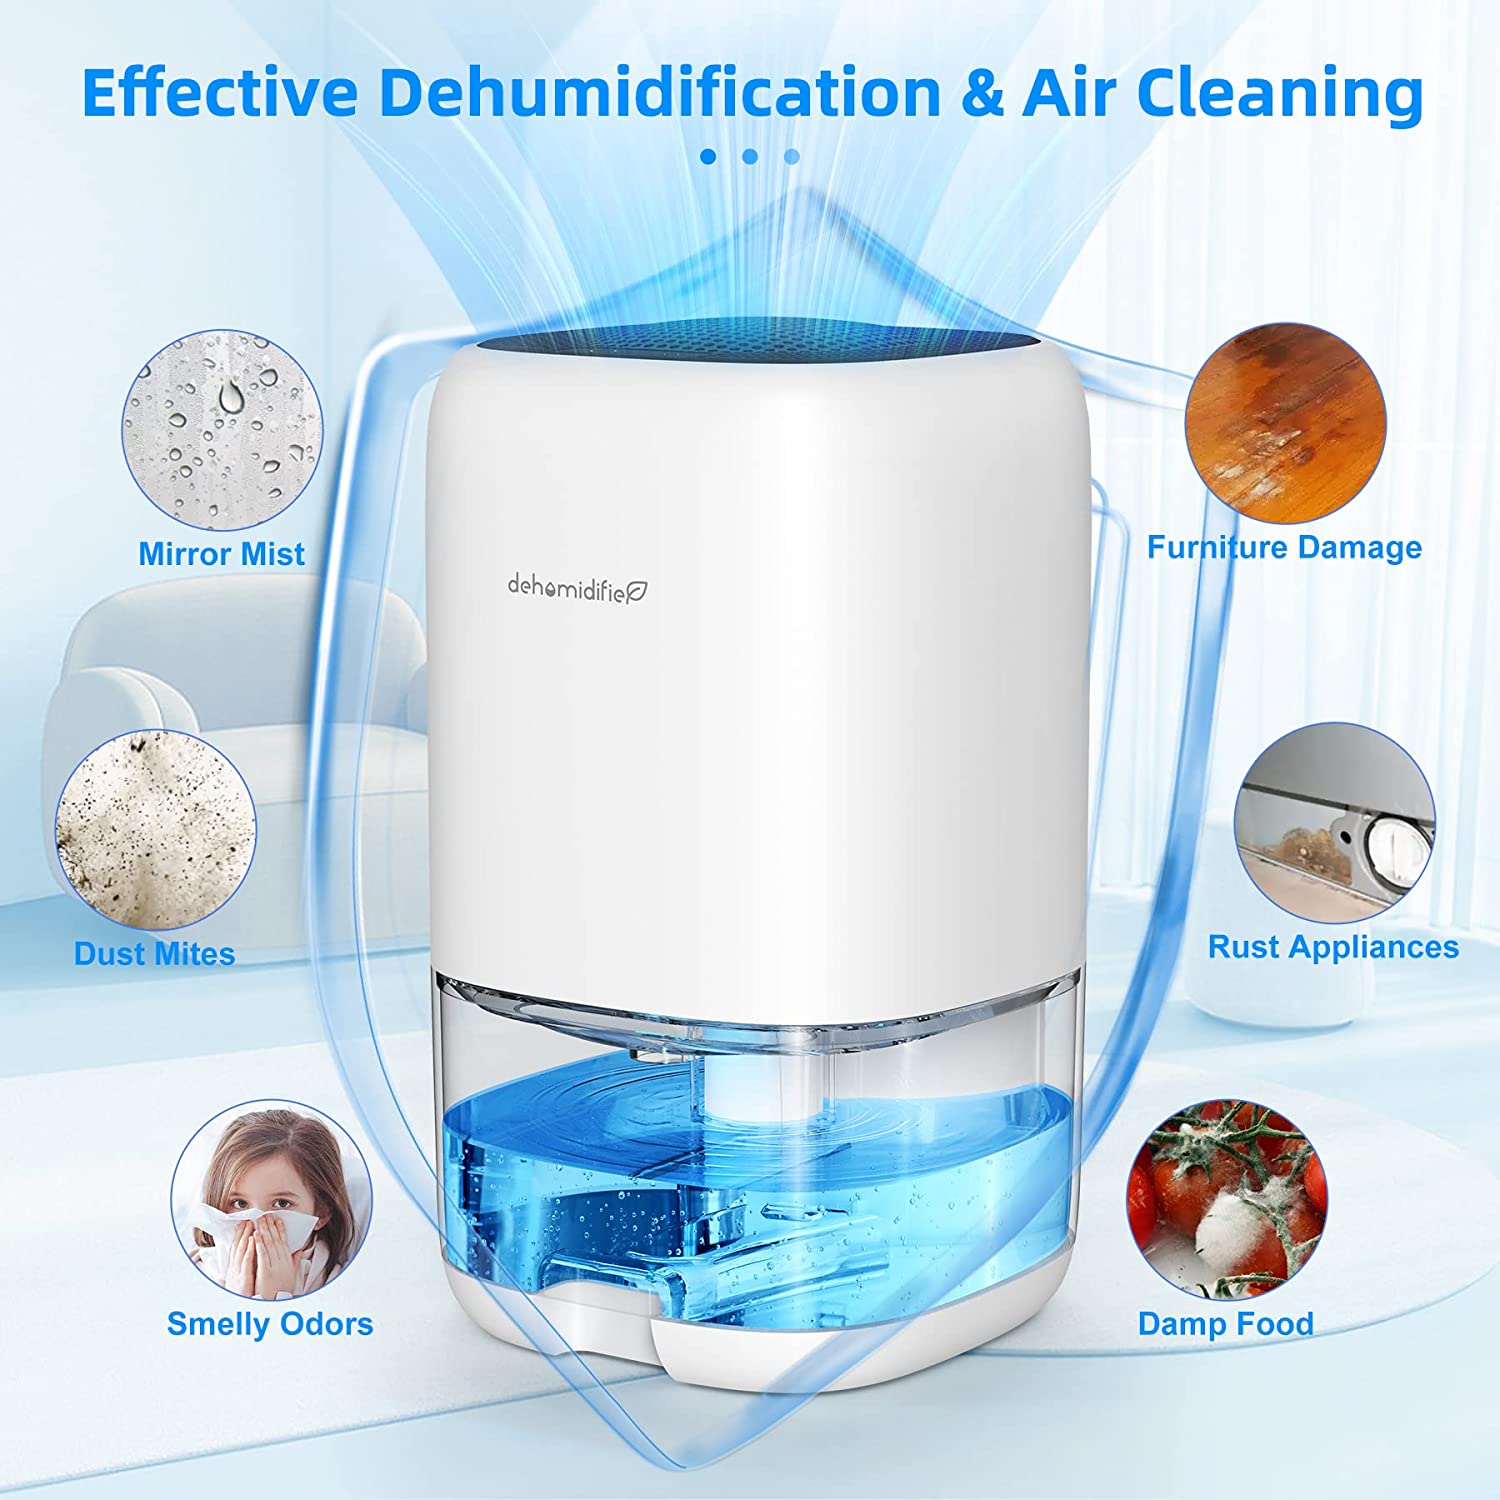 Dehumidifier 1000Ml, Dehumidifiers for Home, Auto Off&Coloured LED Light, Peltier Technology Update, Portable and Ultra Quiet, Dehumidifiers for Drying Clothes, Bedroom, Bathroom, Wardrobe - FoxMart™️ - CONOPU